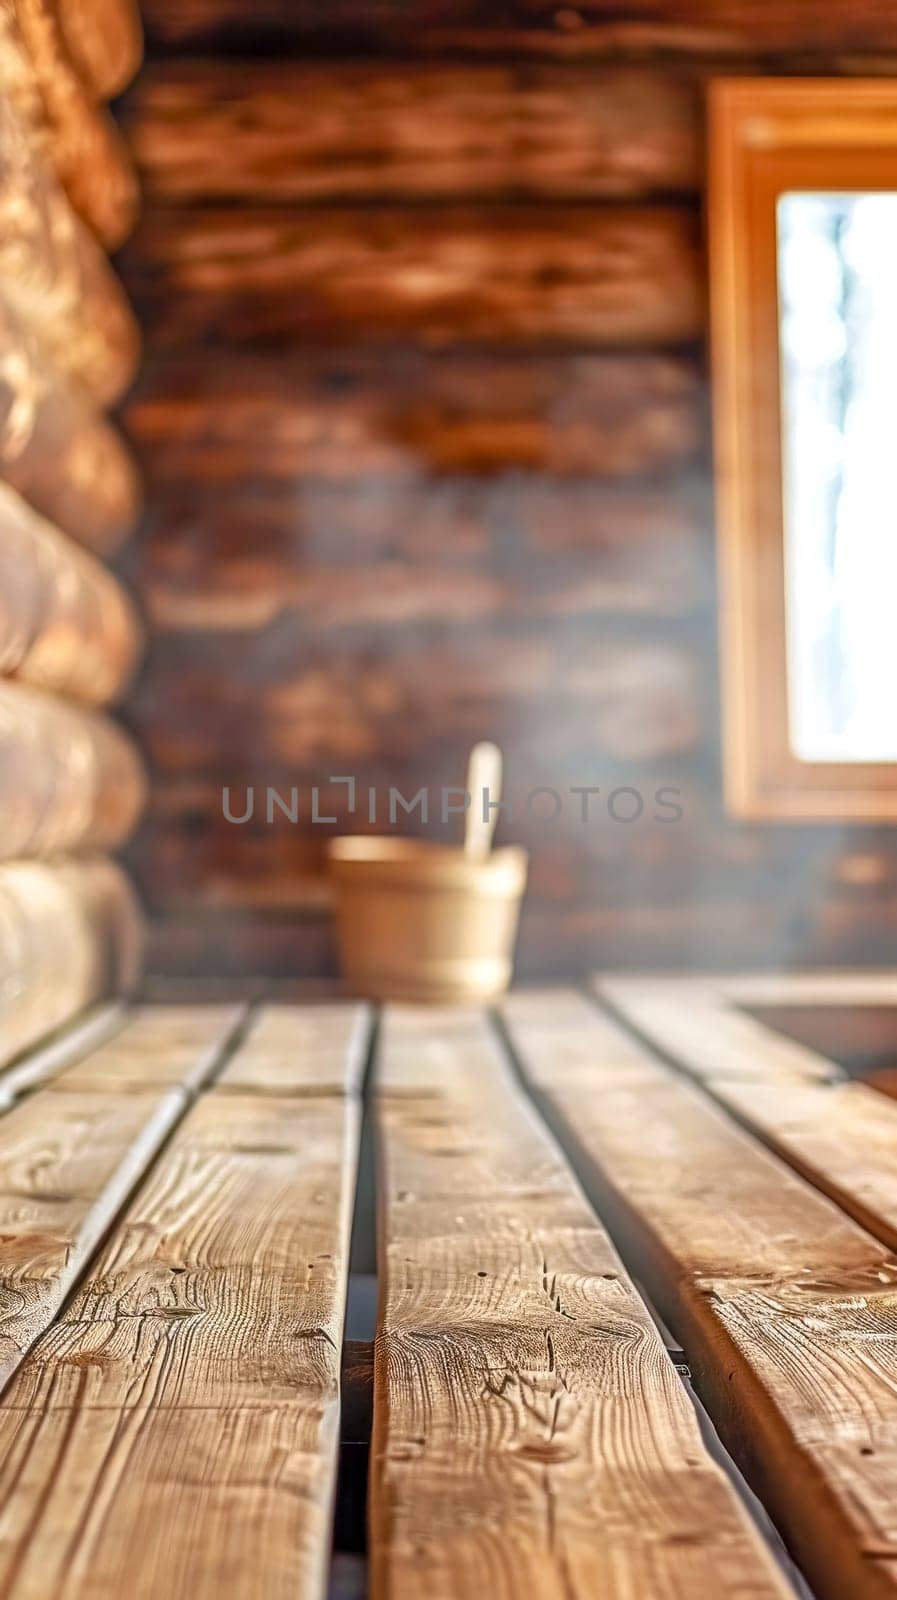 wooden sauna, focus on the wooden benches leading to a sauna bucket and ladle, all bathed in the soft, golden light filtering through a window, suggesting a peaceful and relaxing sauna experience. by Edophoto